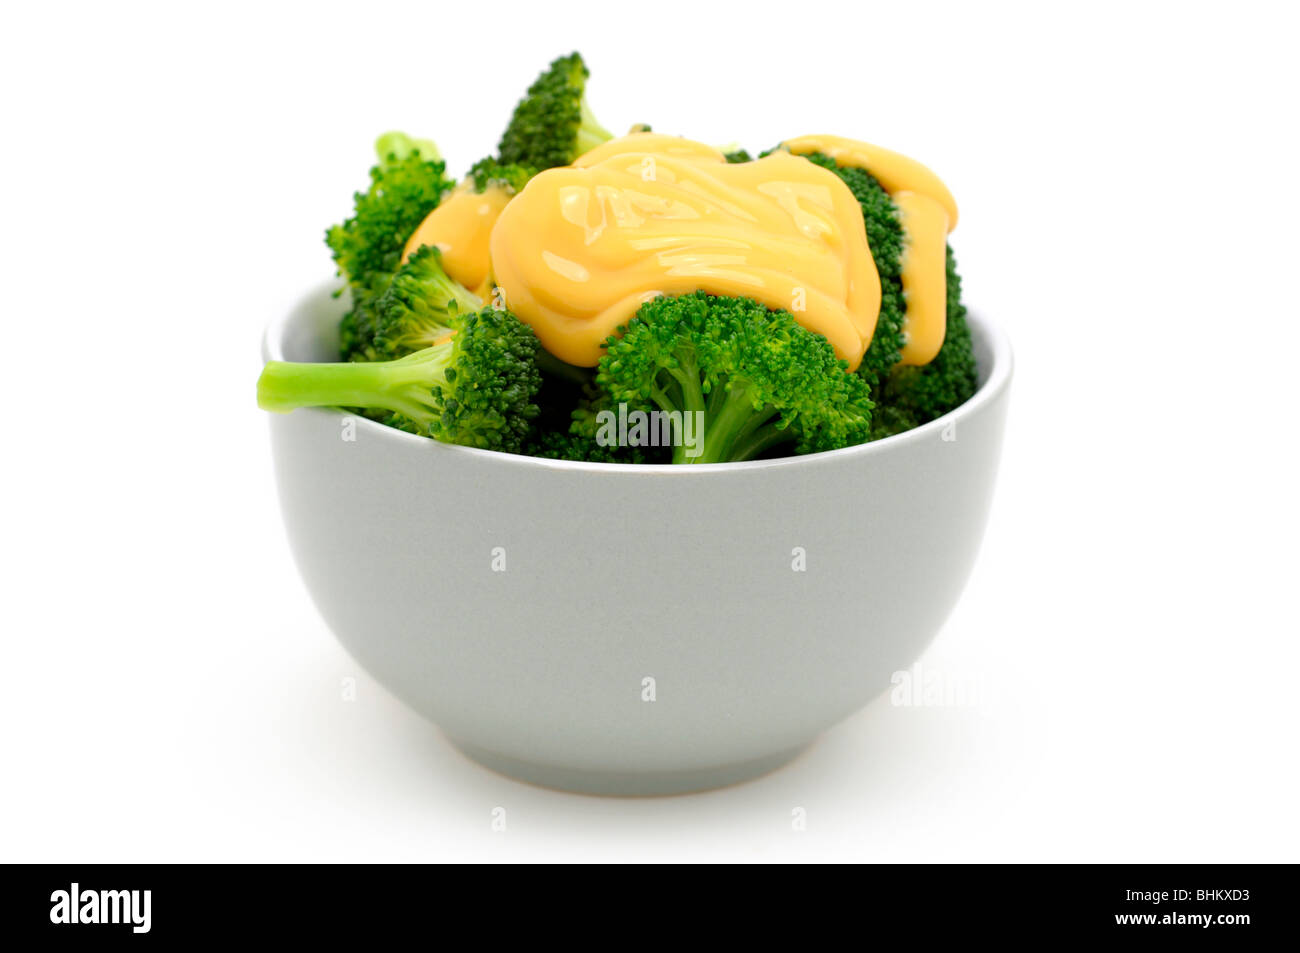 Steamed Broccoli with melted Cheddar Cheese Stock Photo